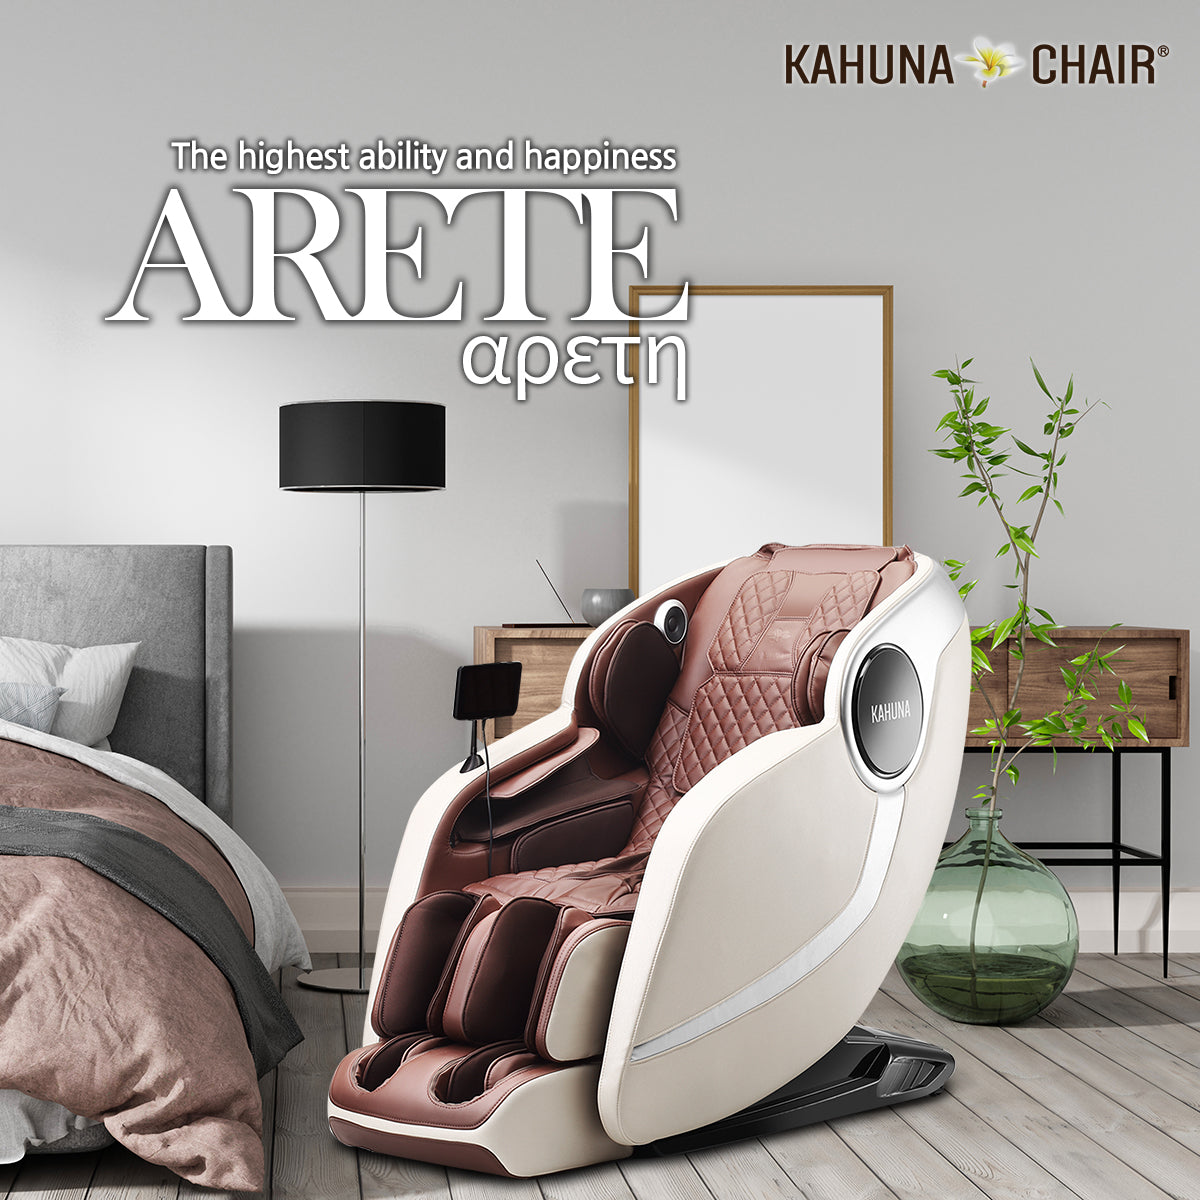 kahuna Em Arete Massage chair the highest ability and happiness